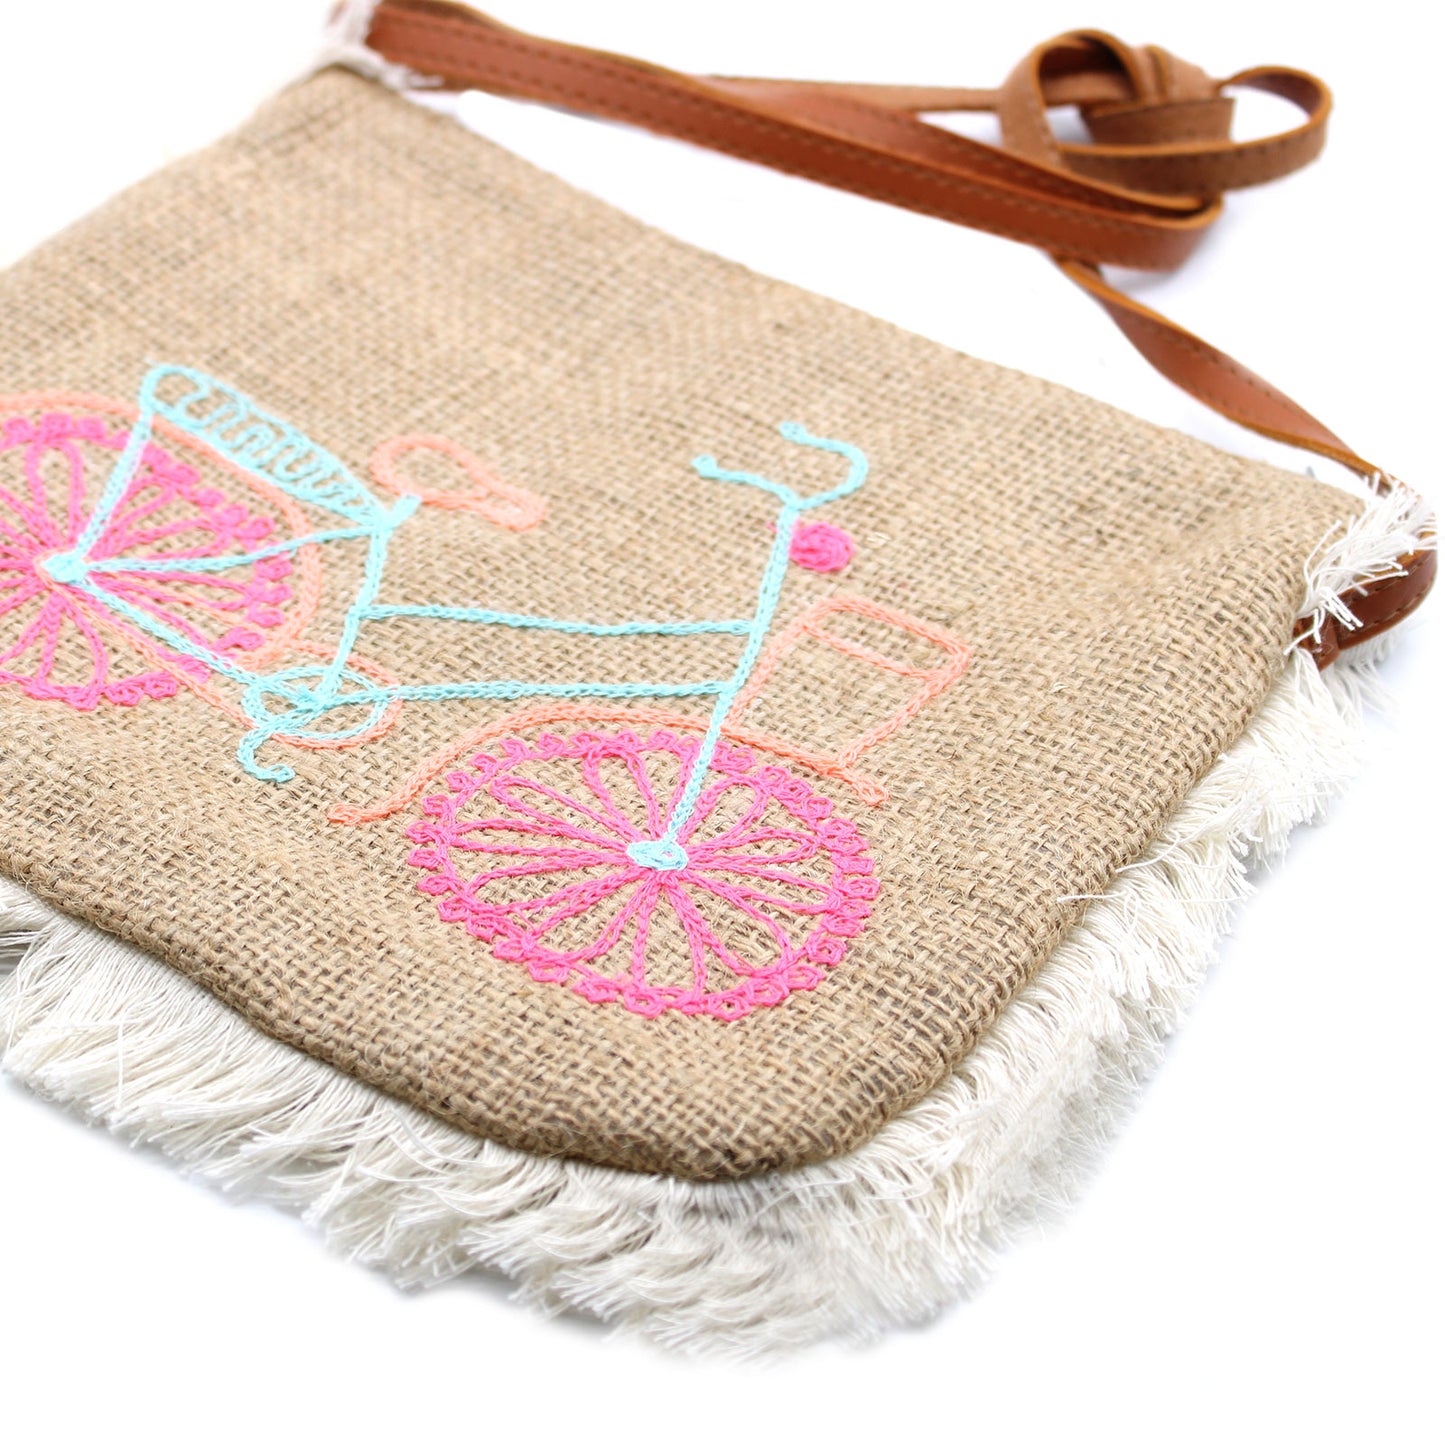 Fringe Bag - Bicycle Embroidery